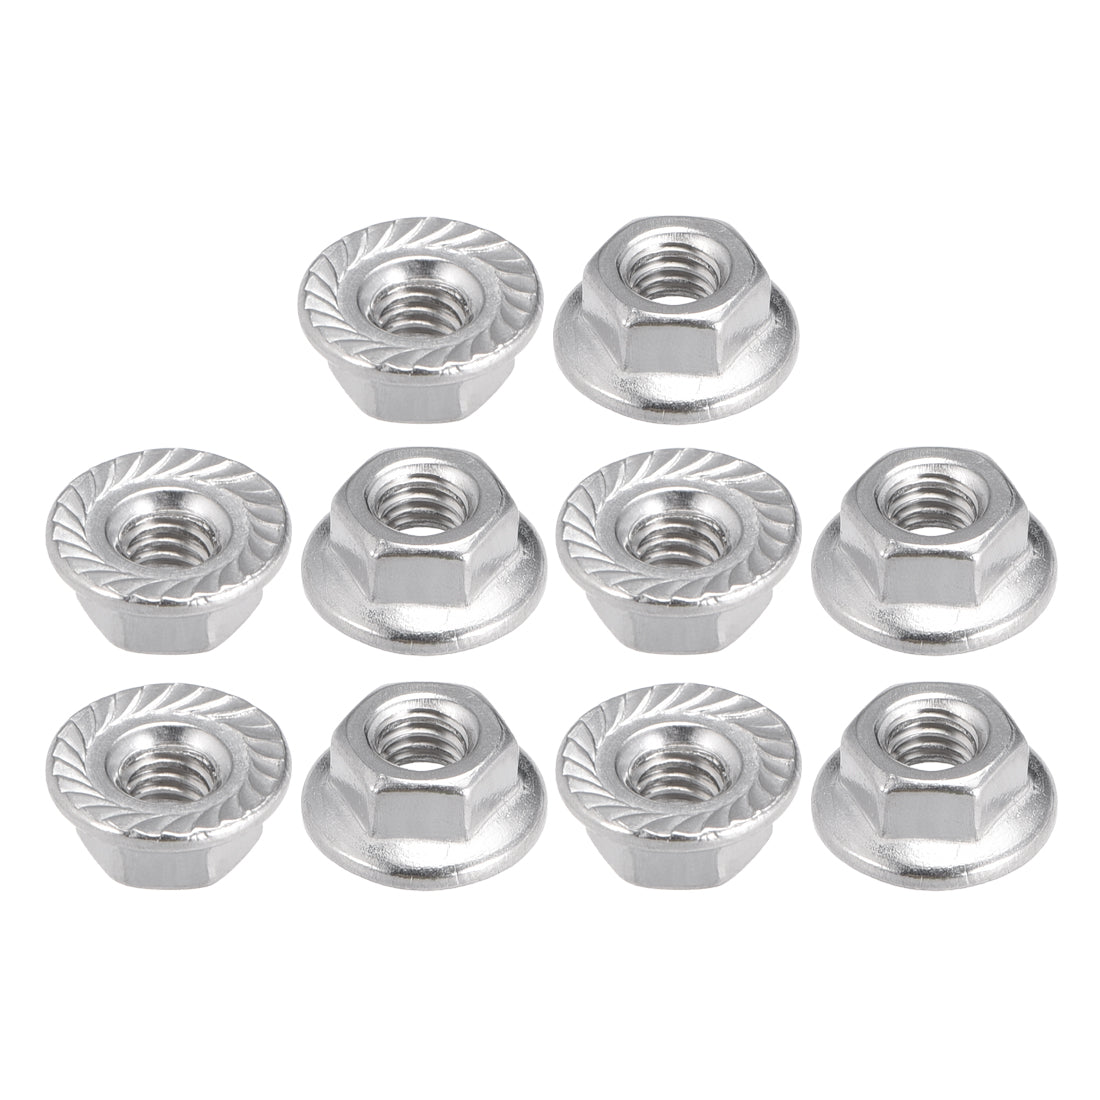 Uxcell Uxcell M4 Serrated Flange Hex Lock Nuts, 304 Stainless Steel, 10 Pcs